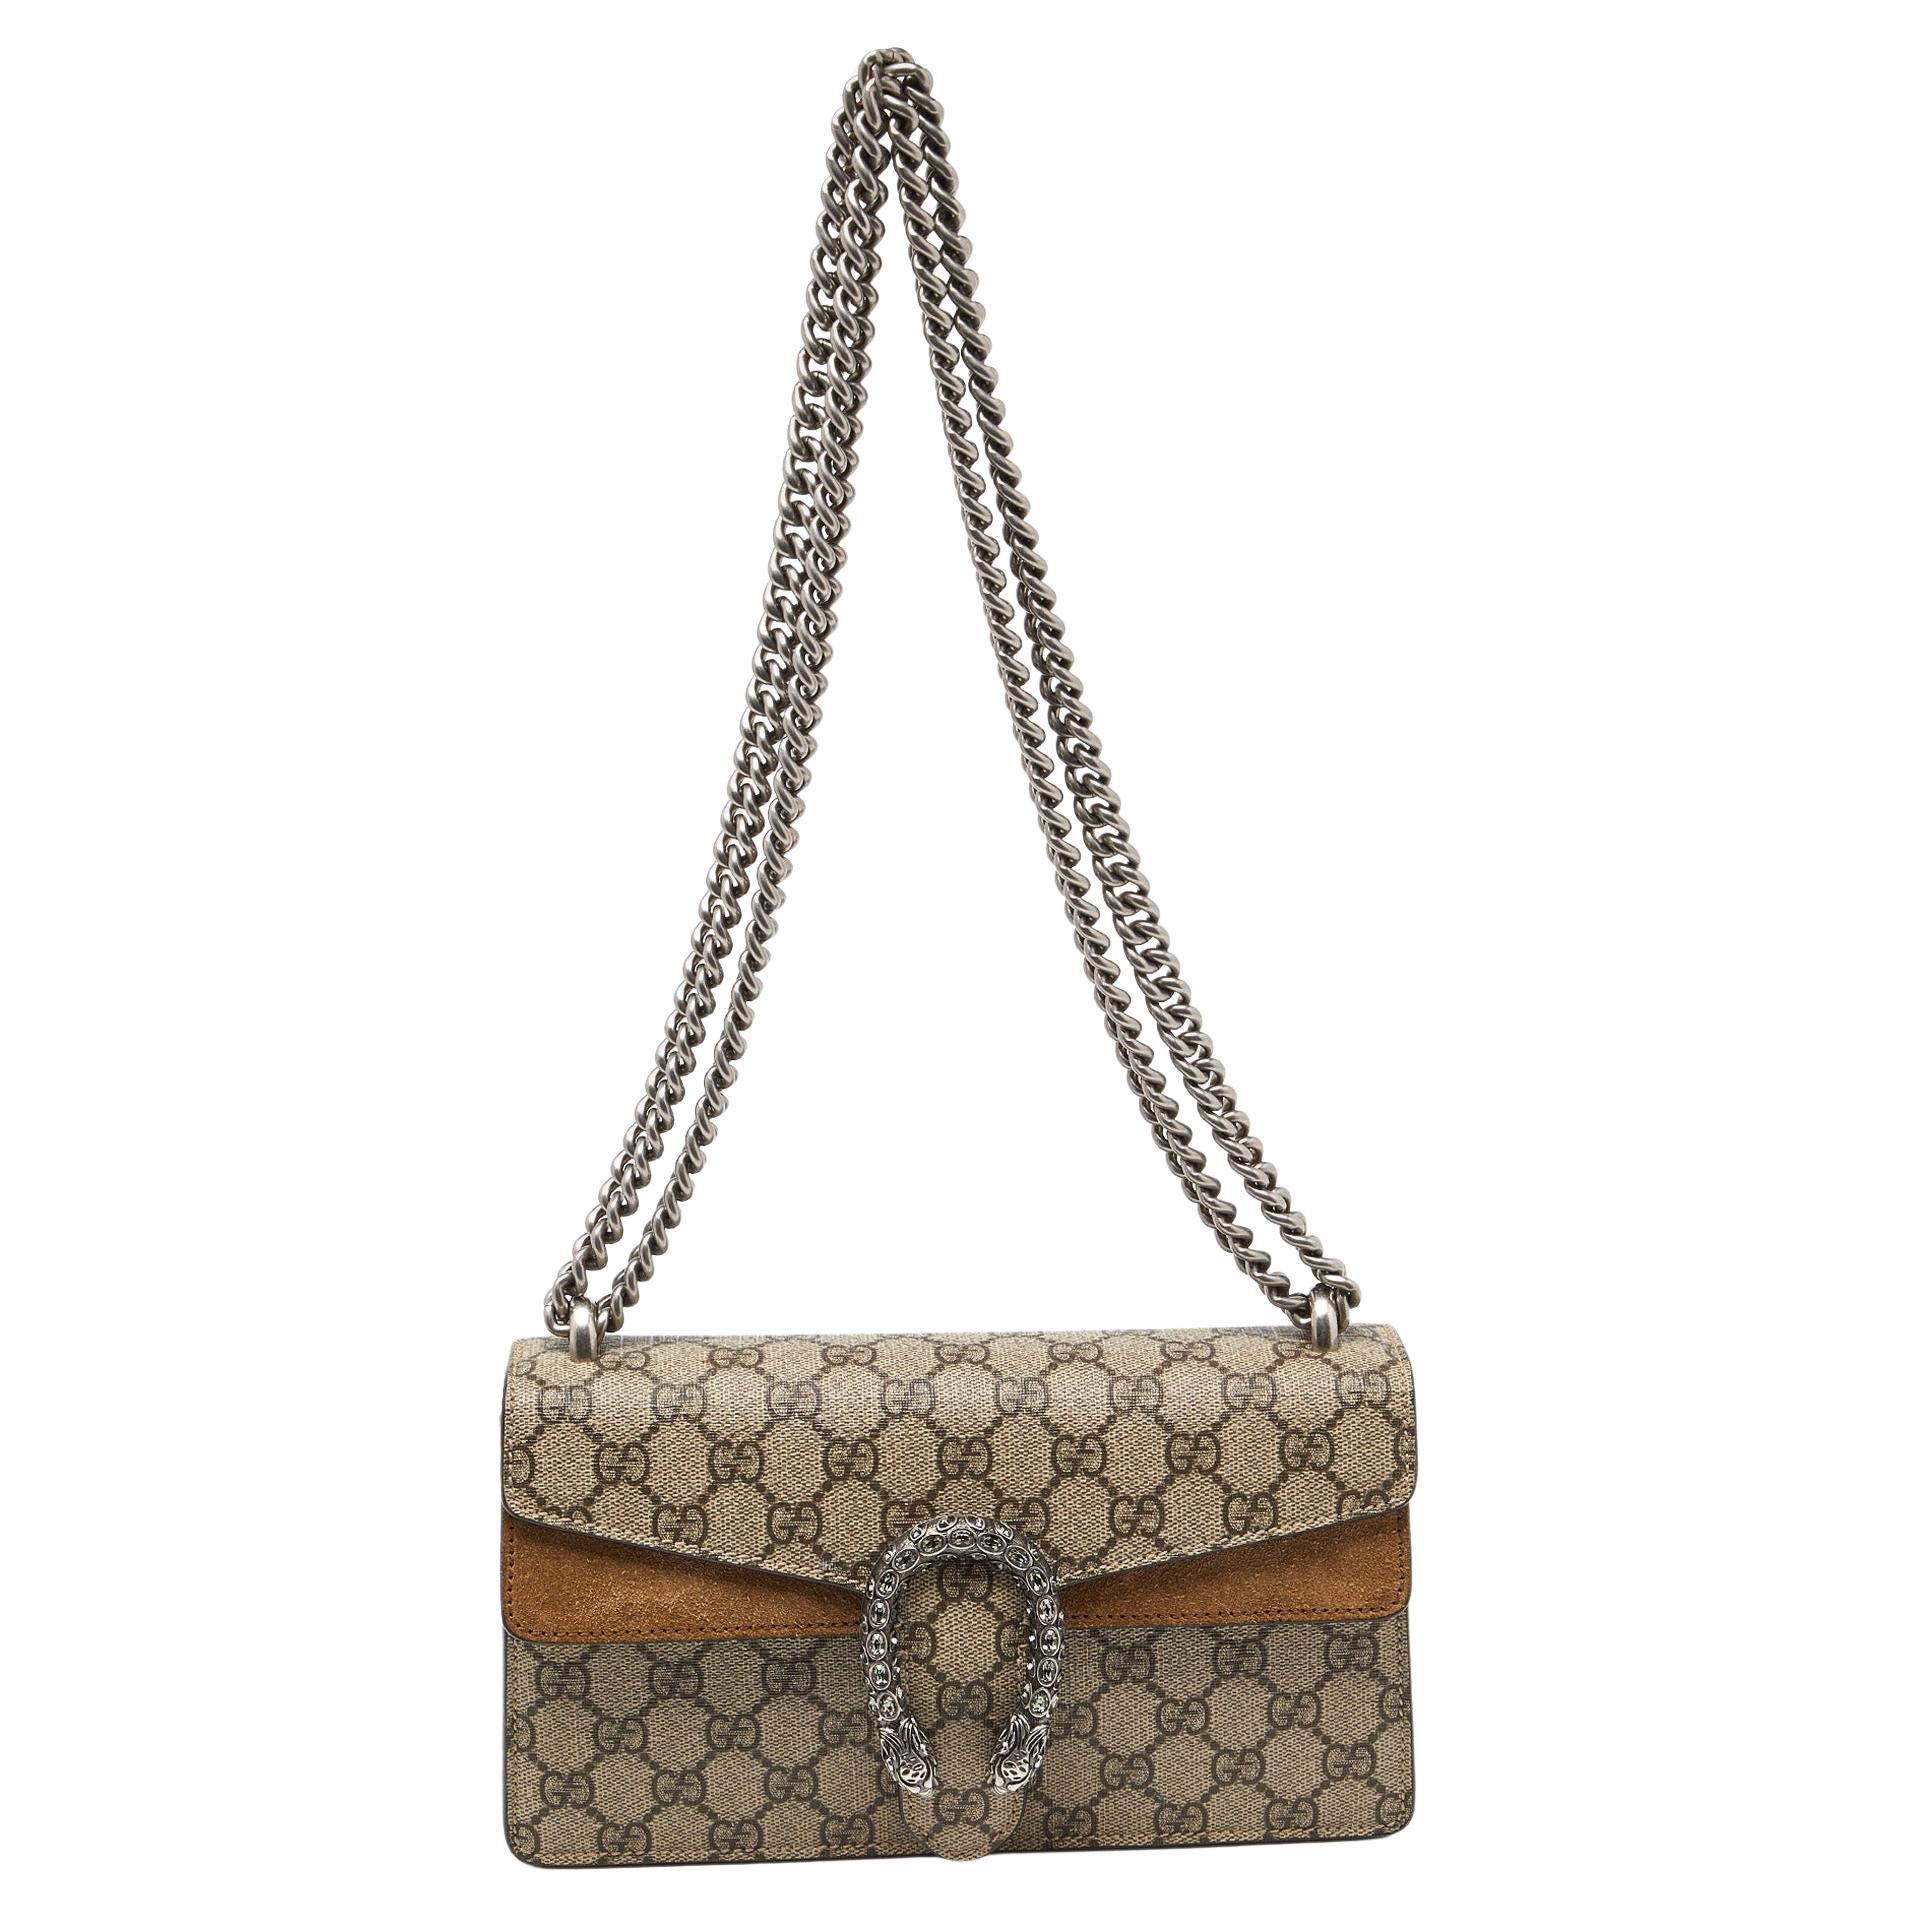 Gucci Beige GG Supreme Canvas and Suede Small Rectangular Dionysus Shoulder Bag For Sale